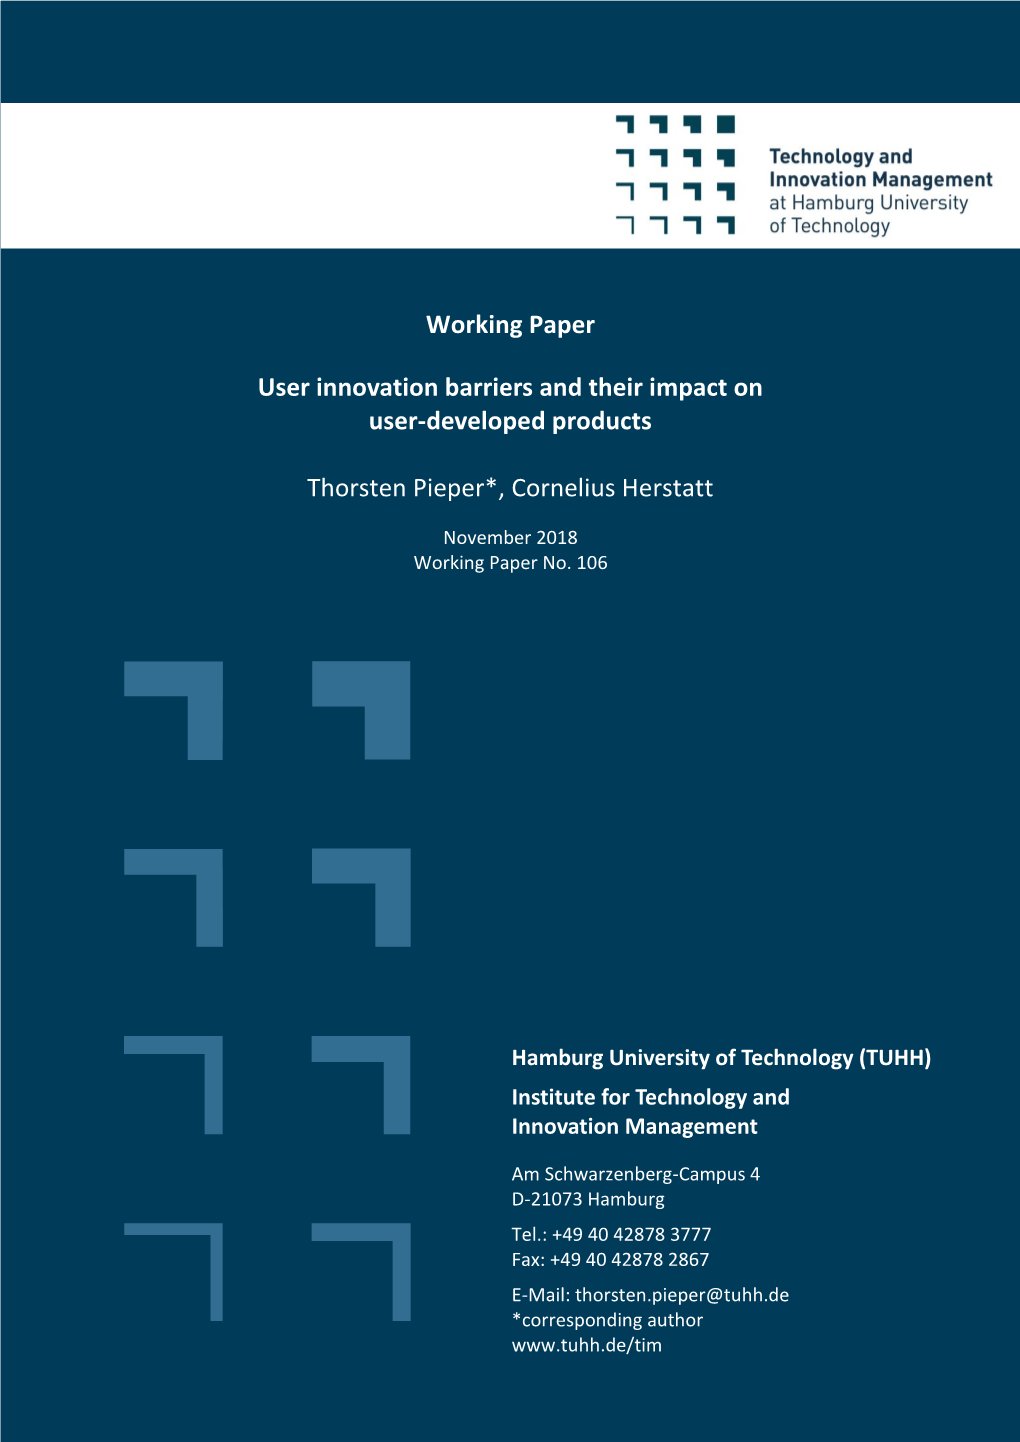 Working Paper User Innovation Barriers and Their Impact On